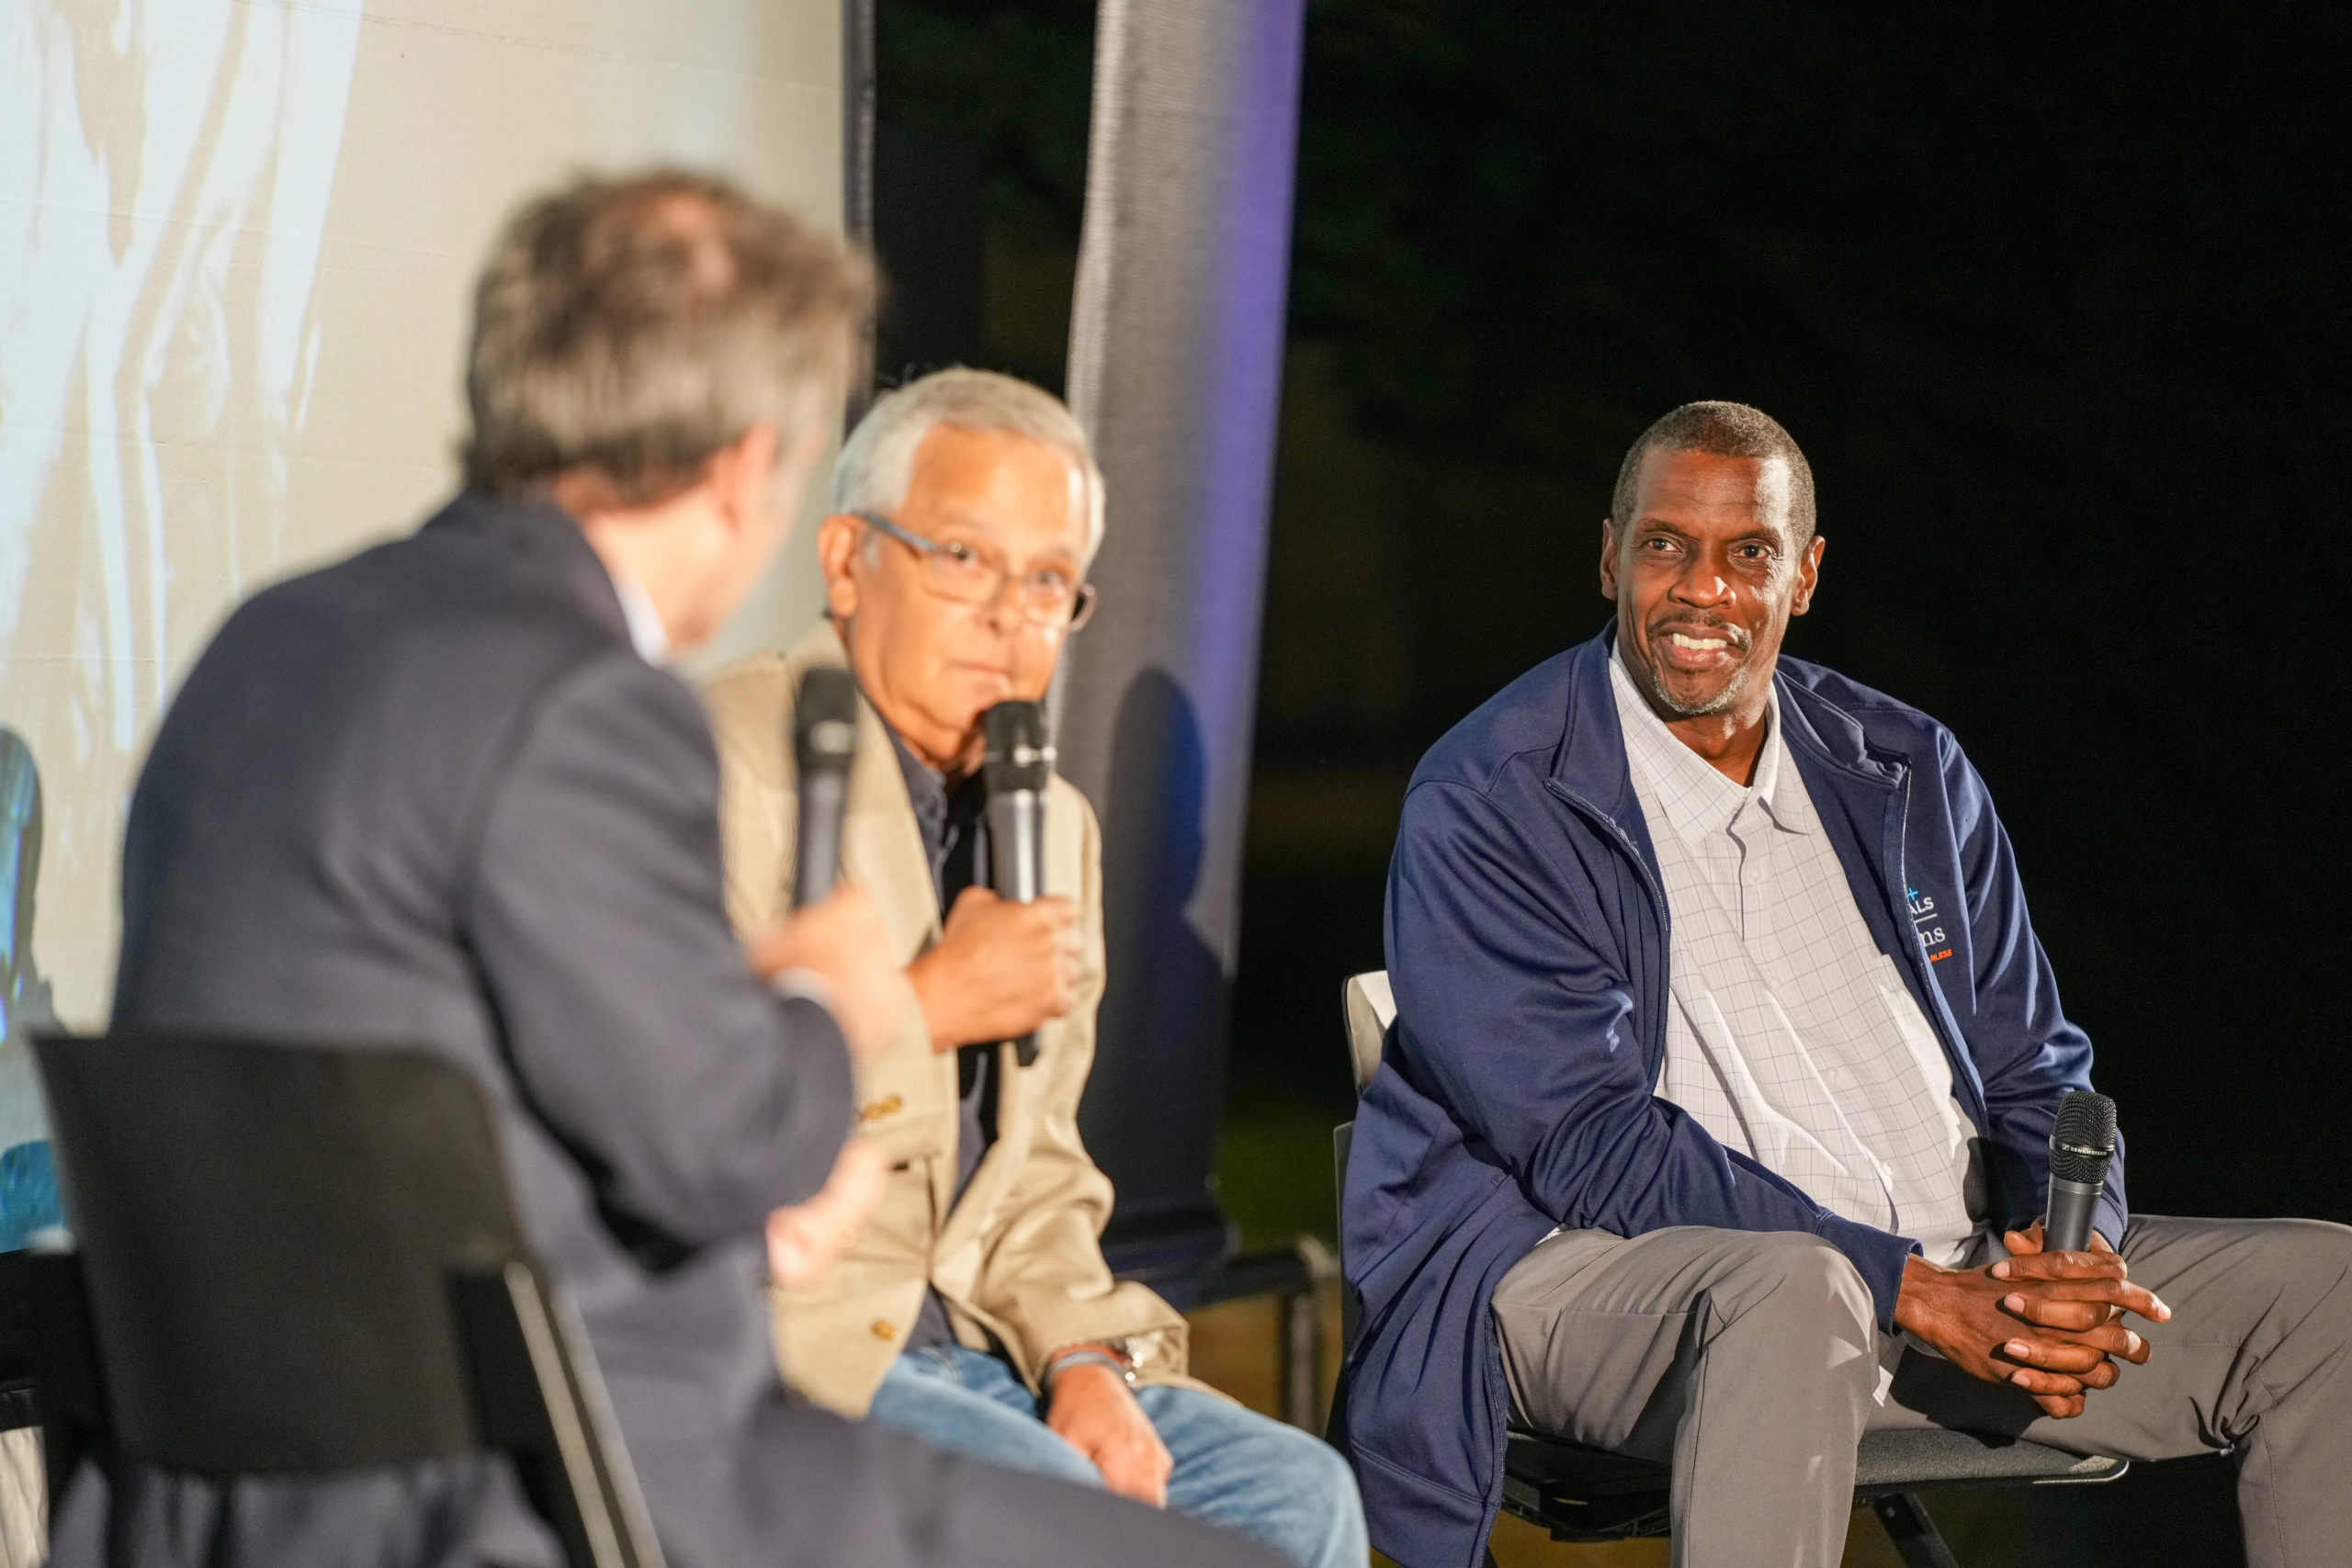 Mike Lupica leads a panel discussion with Dwight Gooden and Nick Davis.